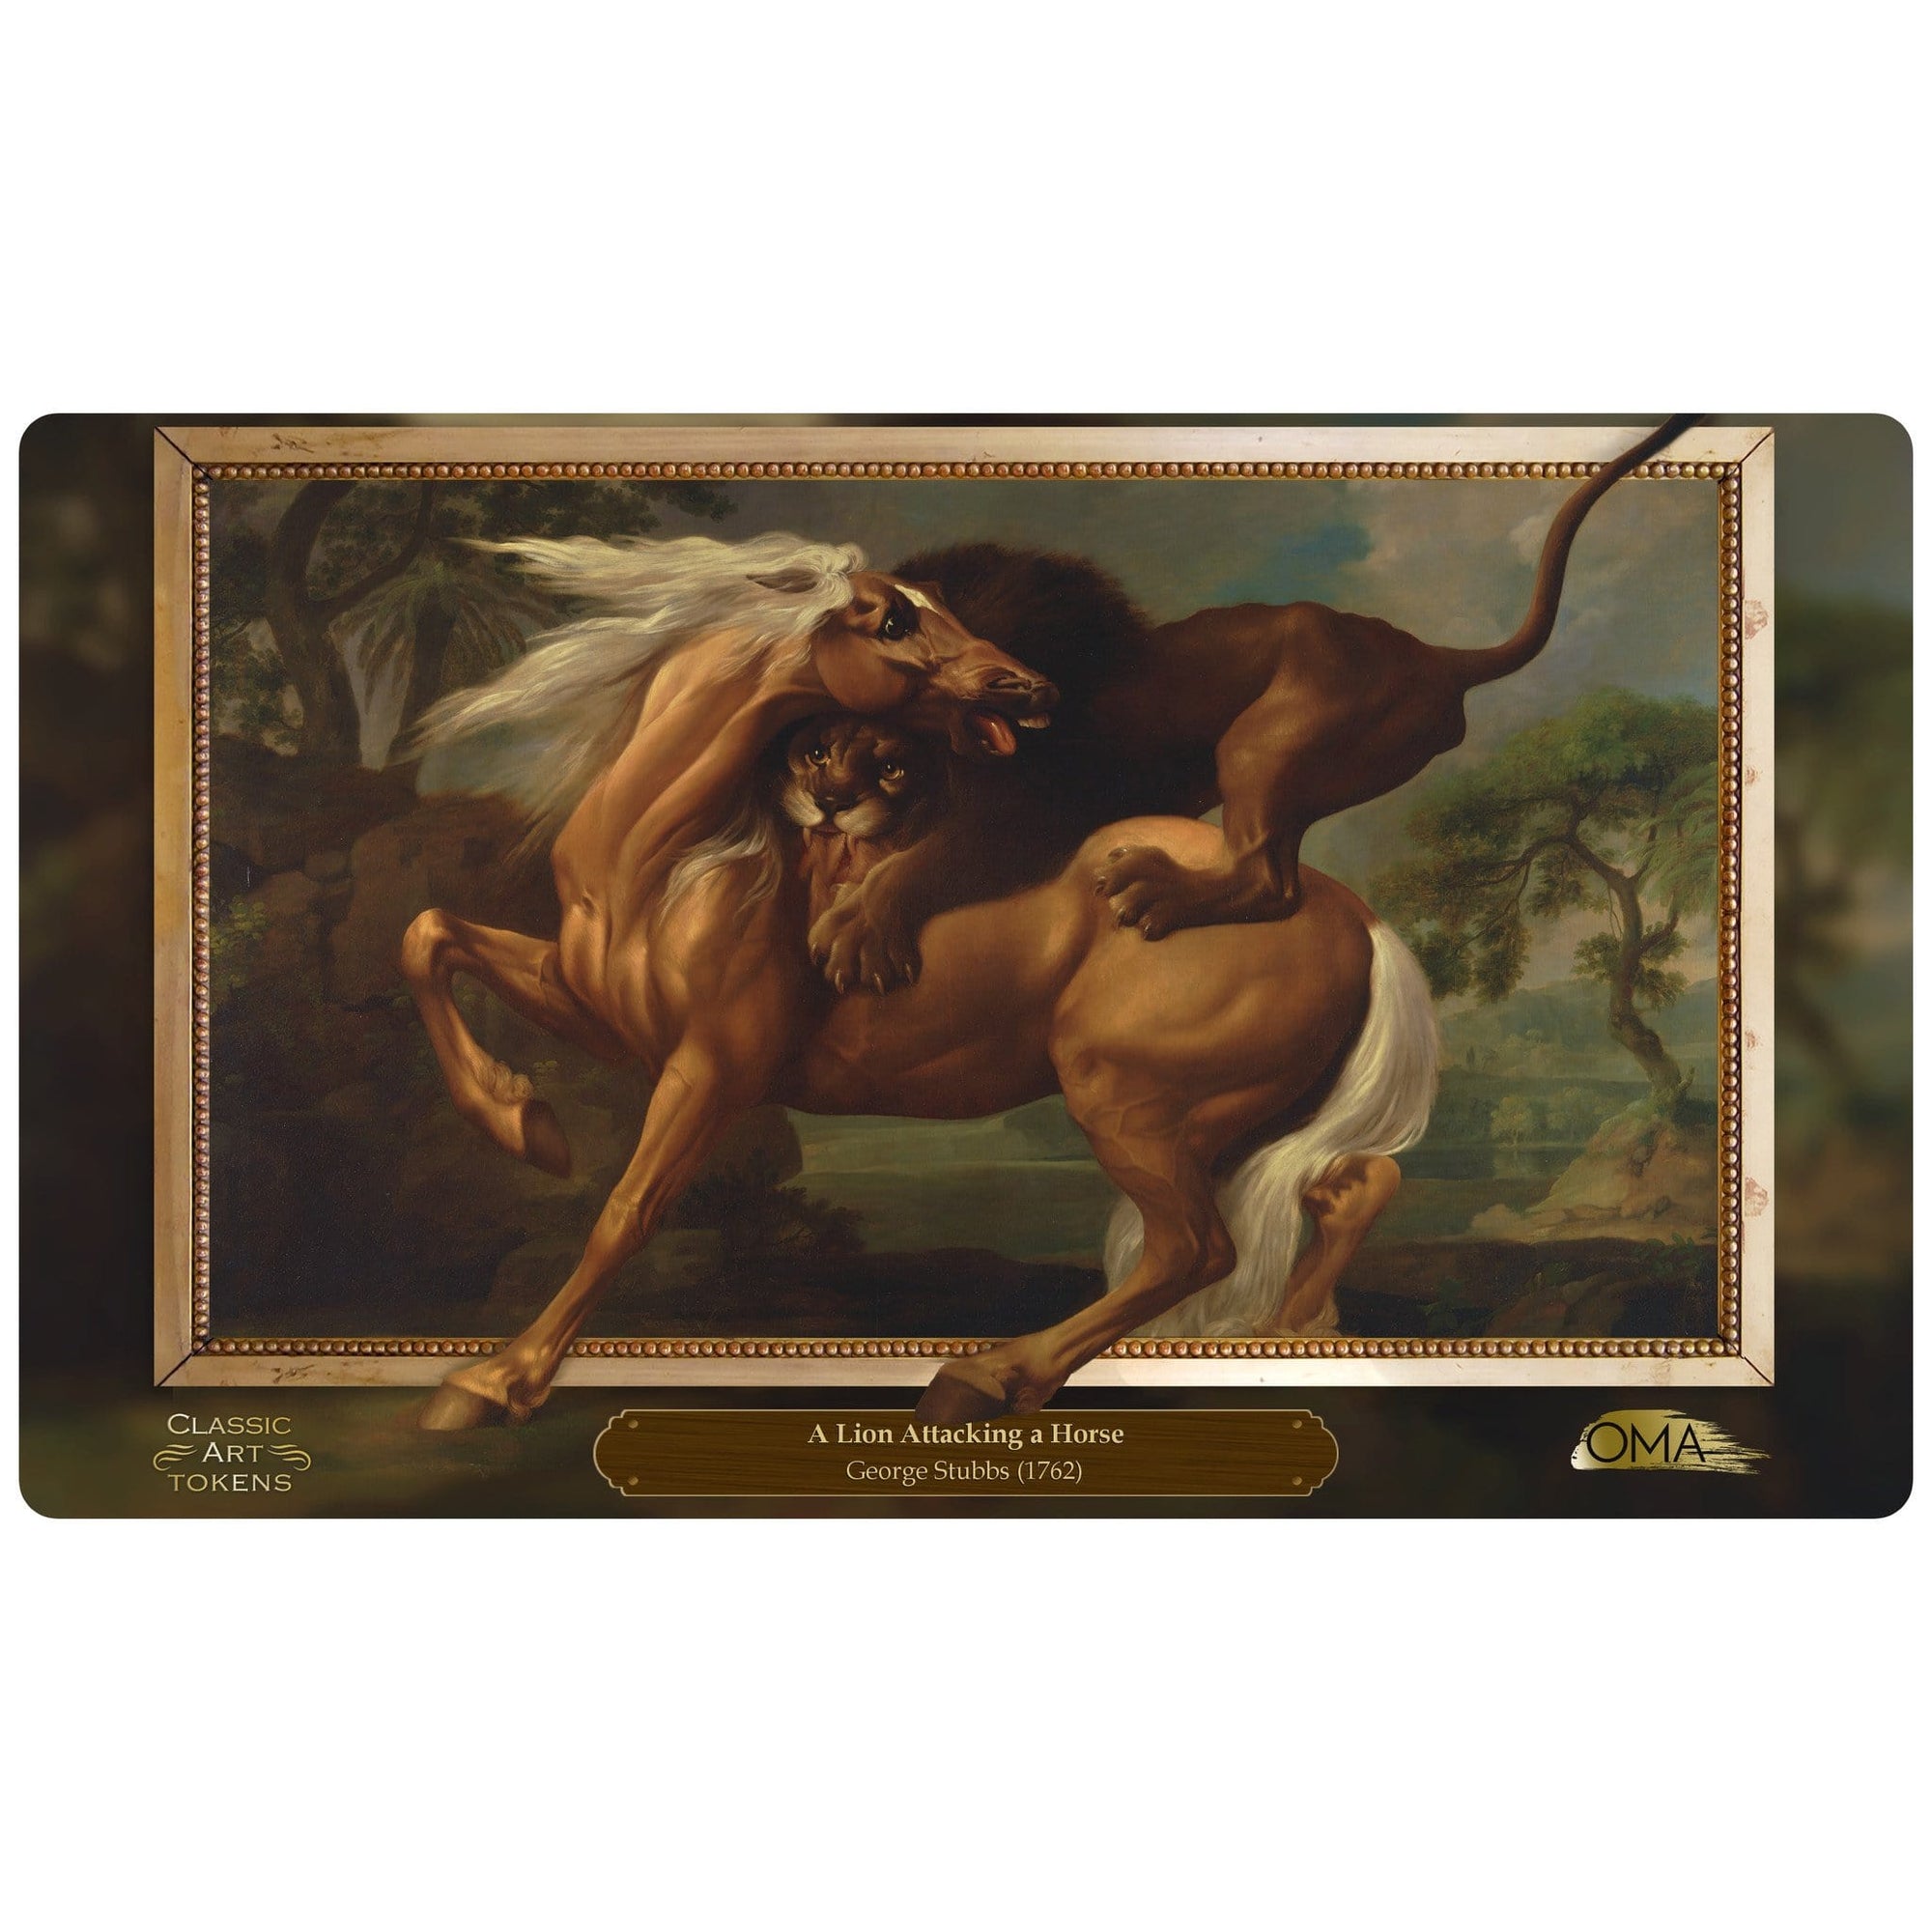 Carnivore Playmat by George Stubbs - Playmat - Original Magic Art - Accessories for Magic the Gathering and other card games